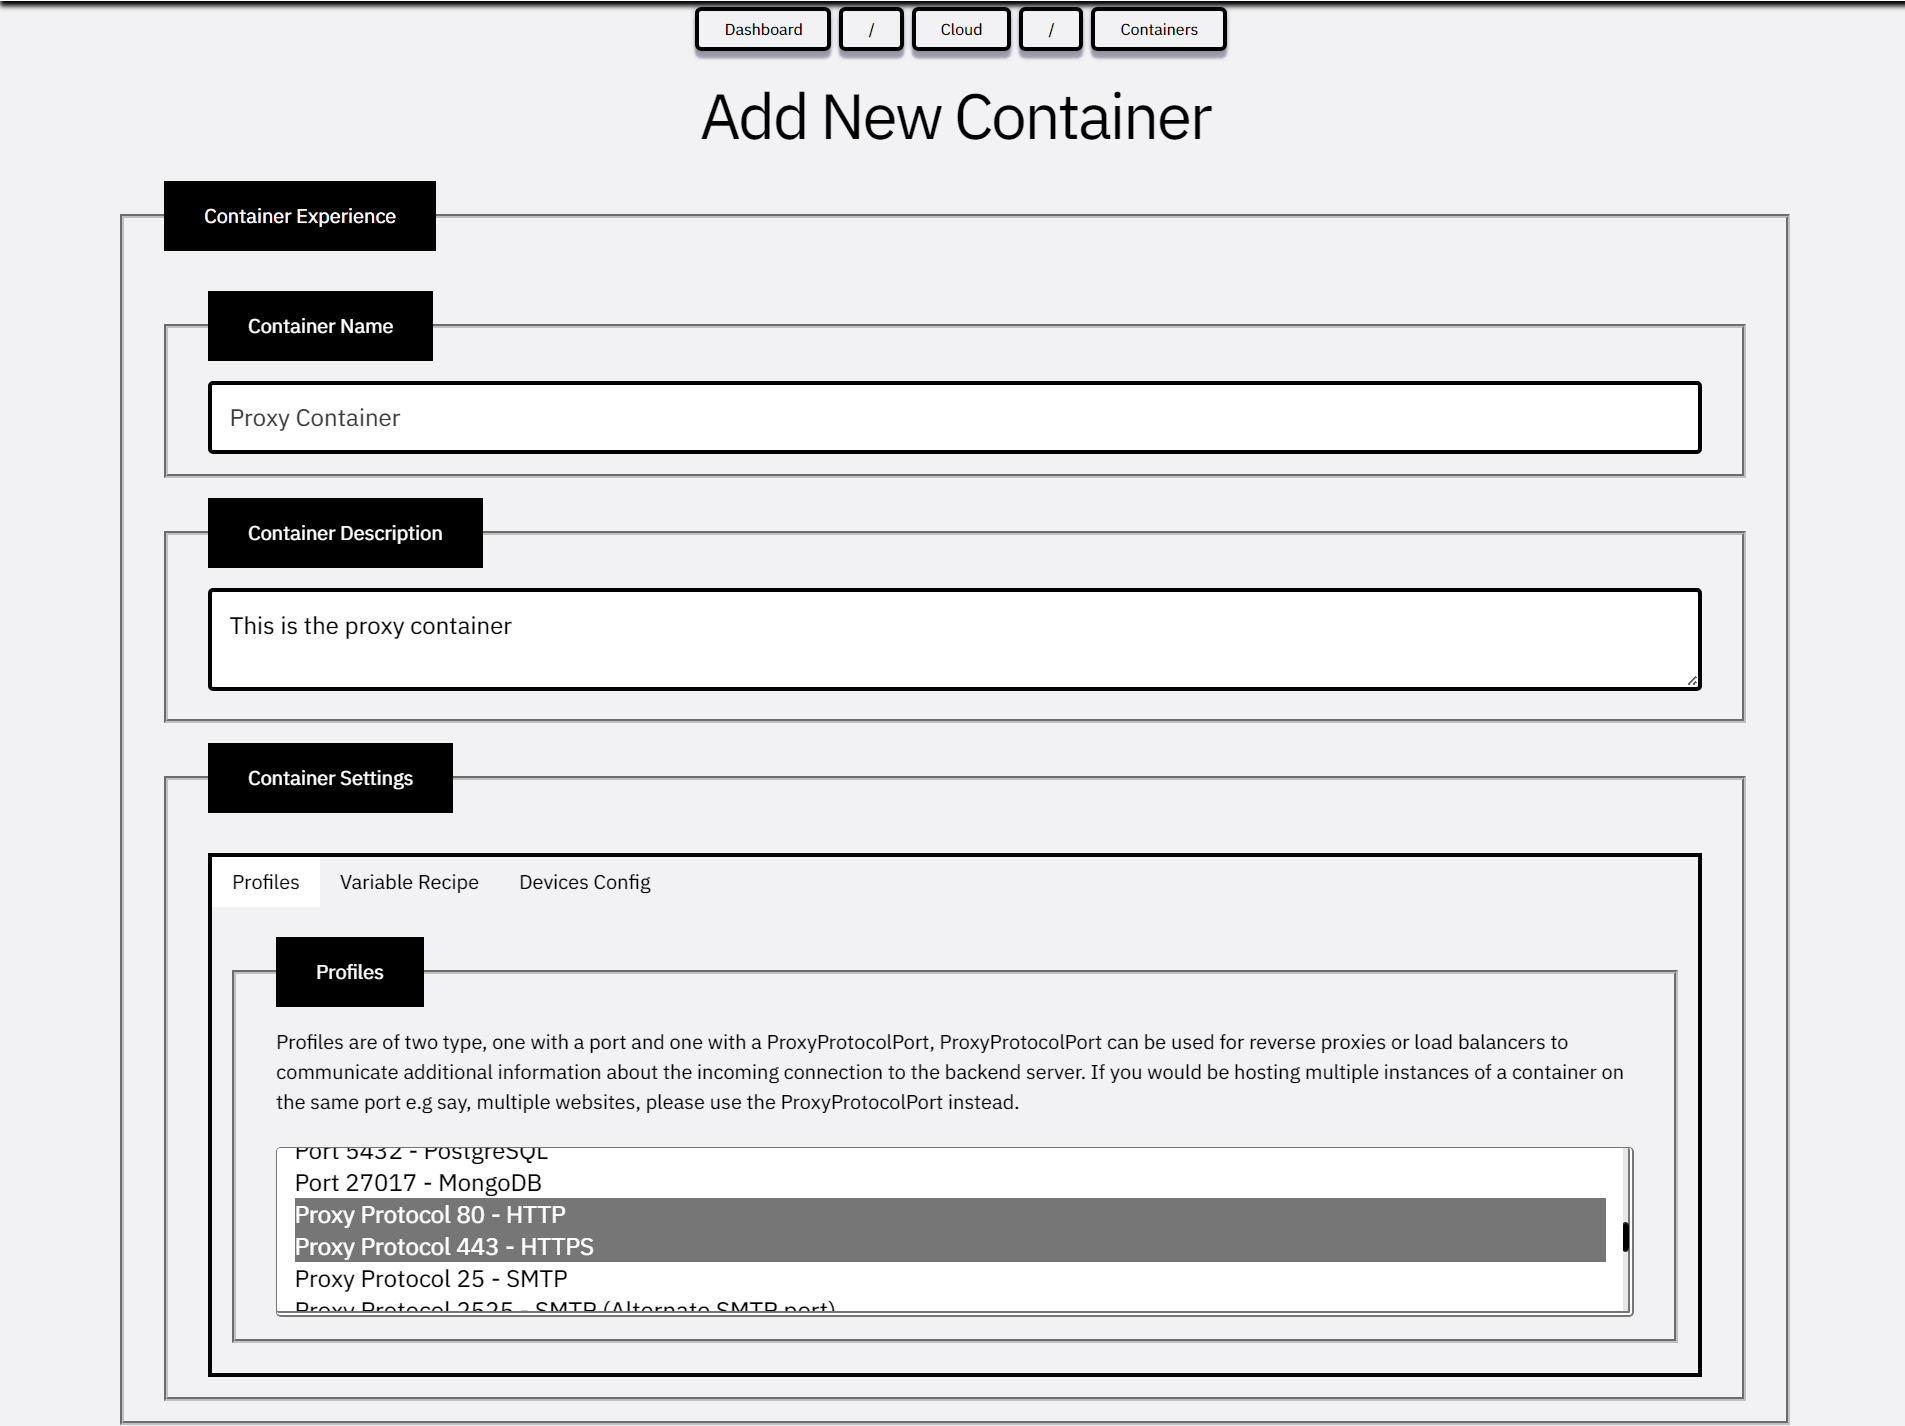 Adding Proxy Container - Step One